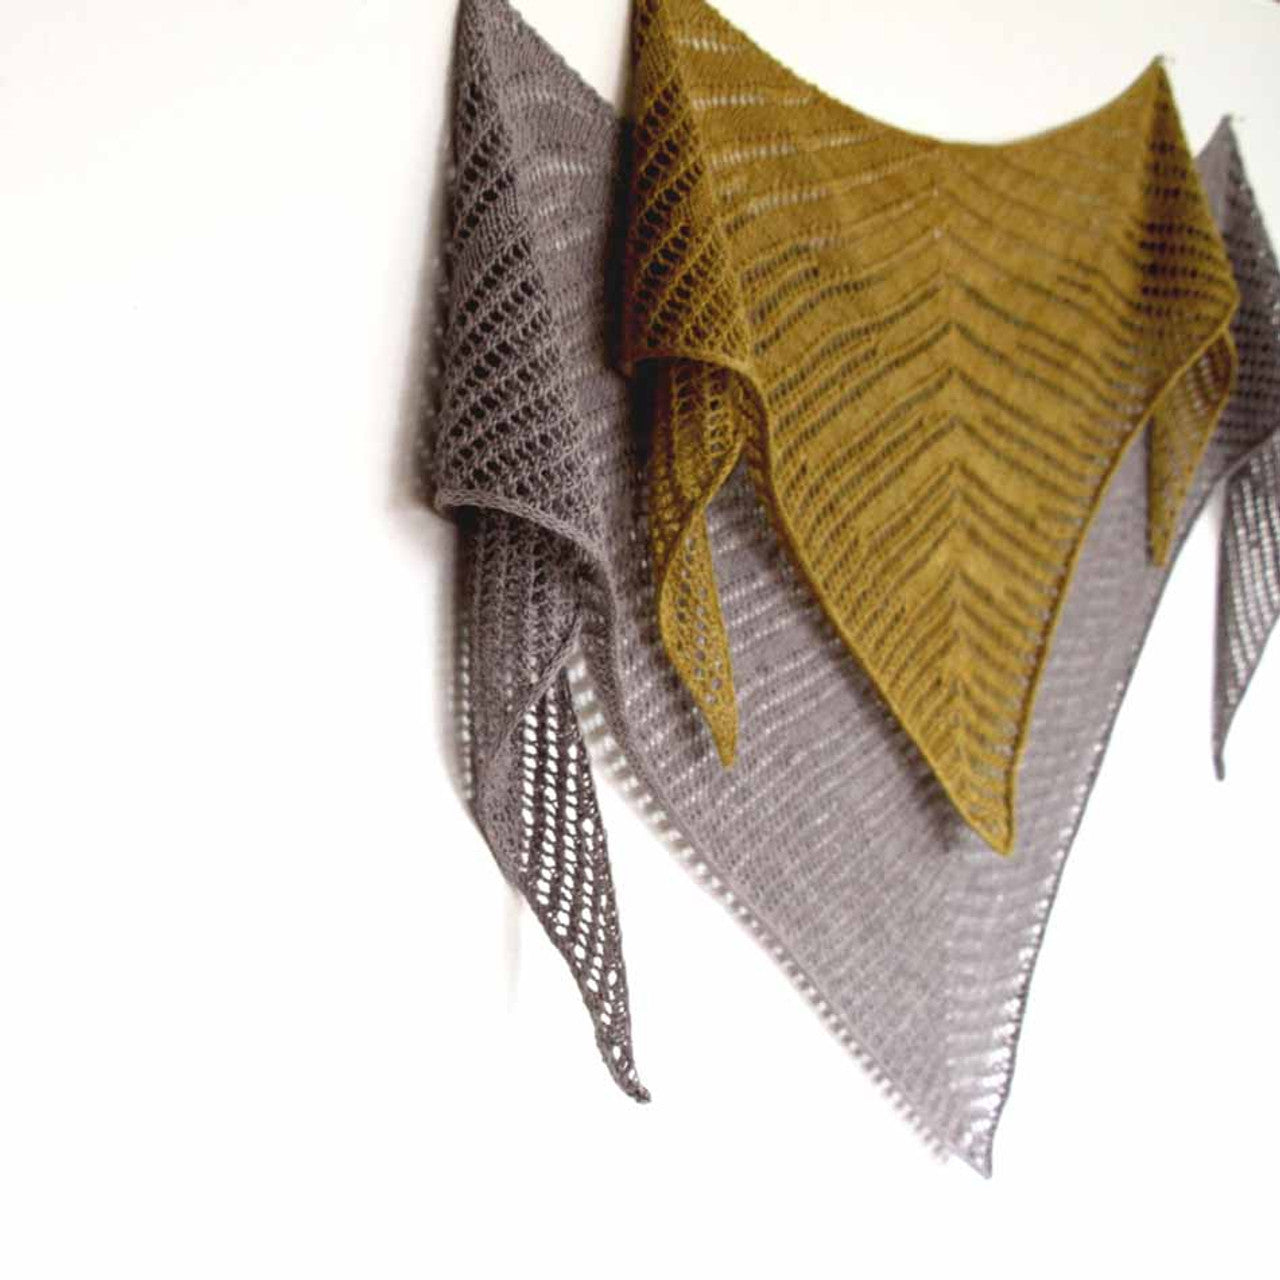 Aperture Shawl by Ambah O'Brien - knit in fingering weight 66" wingspan x 19.5" using 400 yards